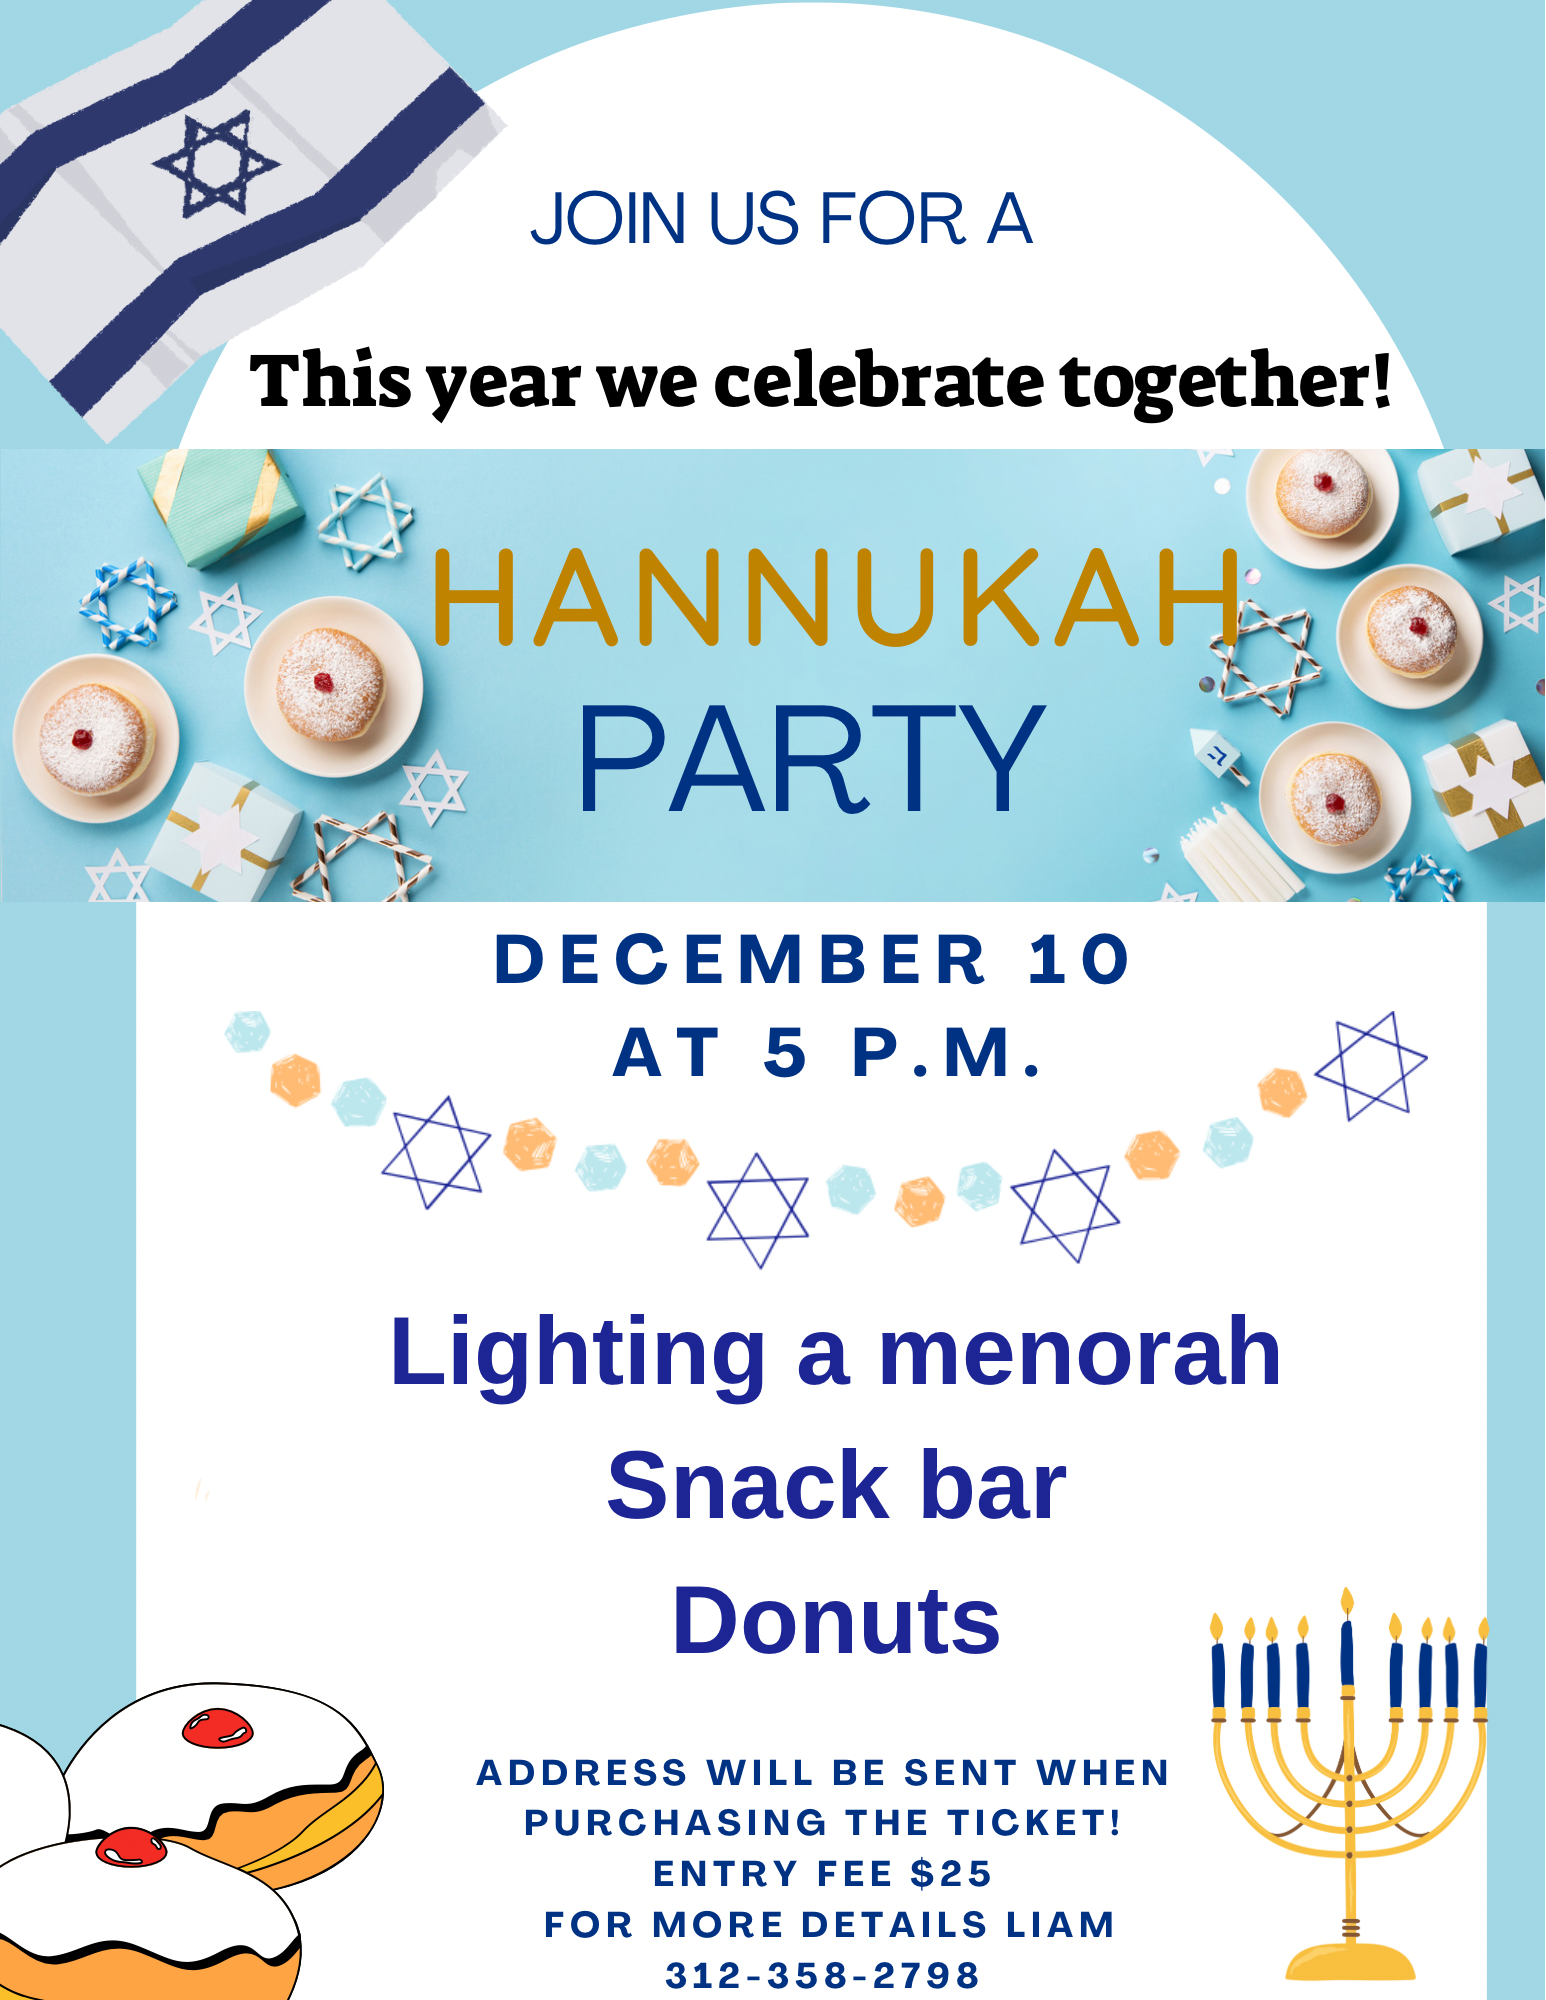 Hanukkah Party Hebrew Speakers Chicago ChiTribe Mama's Little Chef